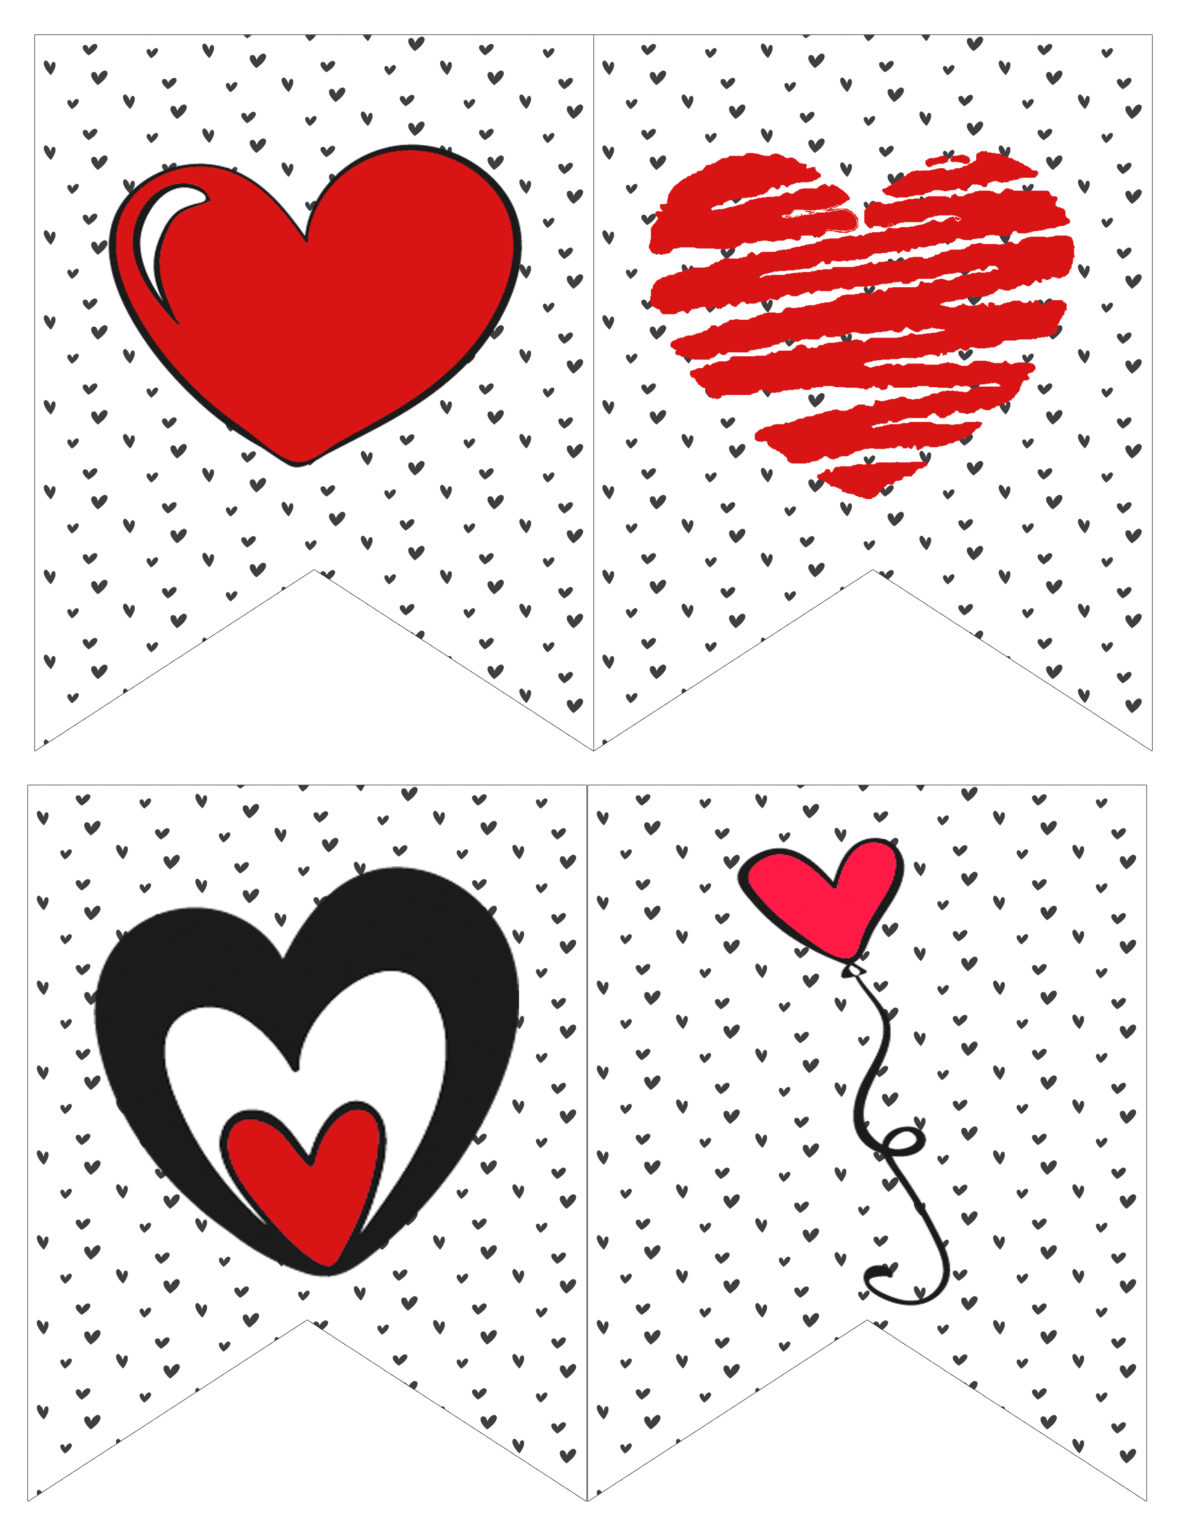 Heart Banner free printables to print and share the love! inkhappi